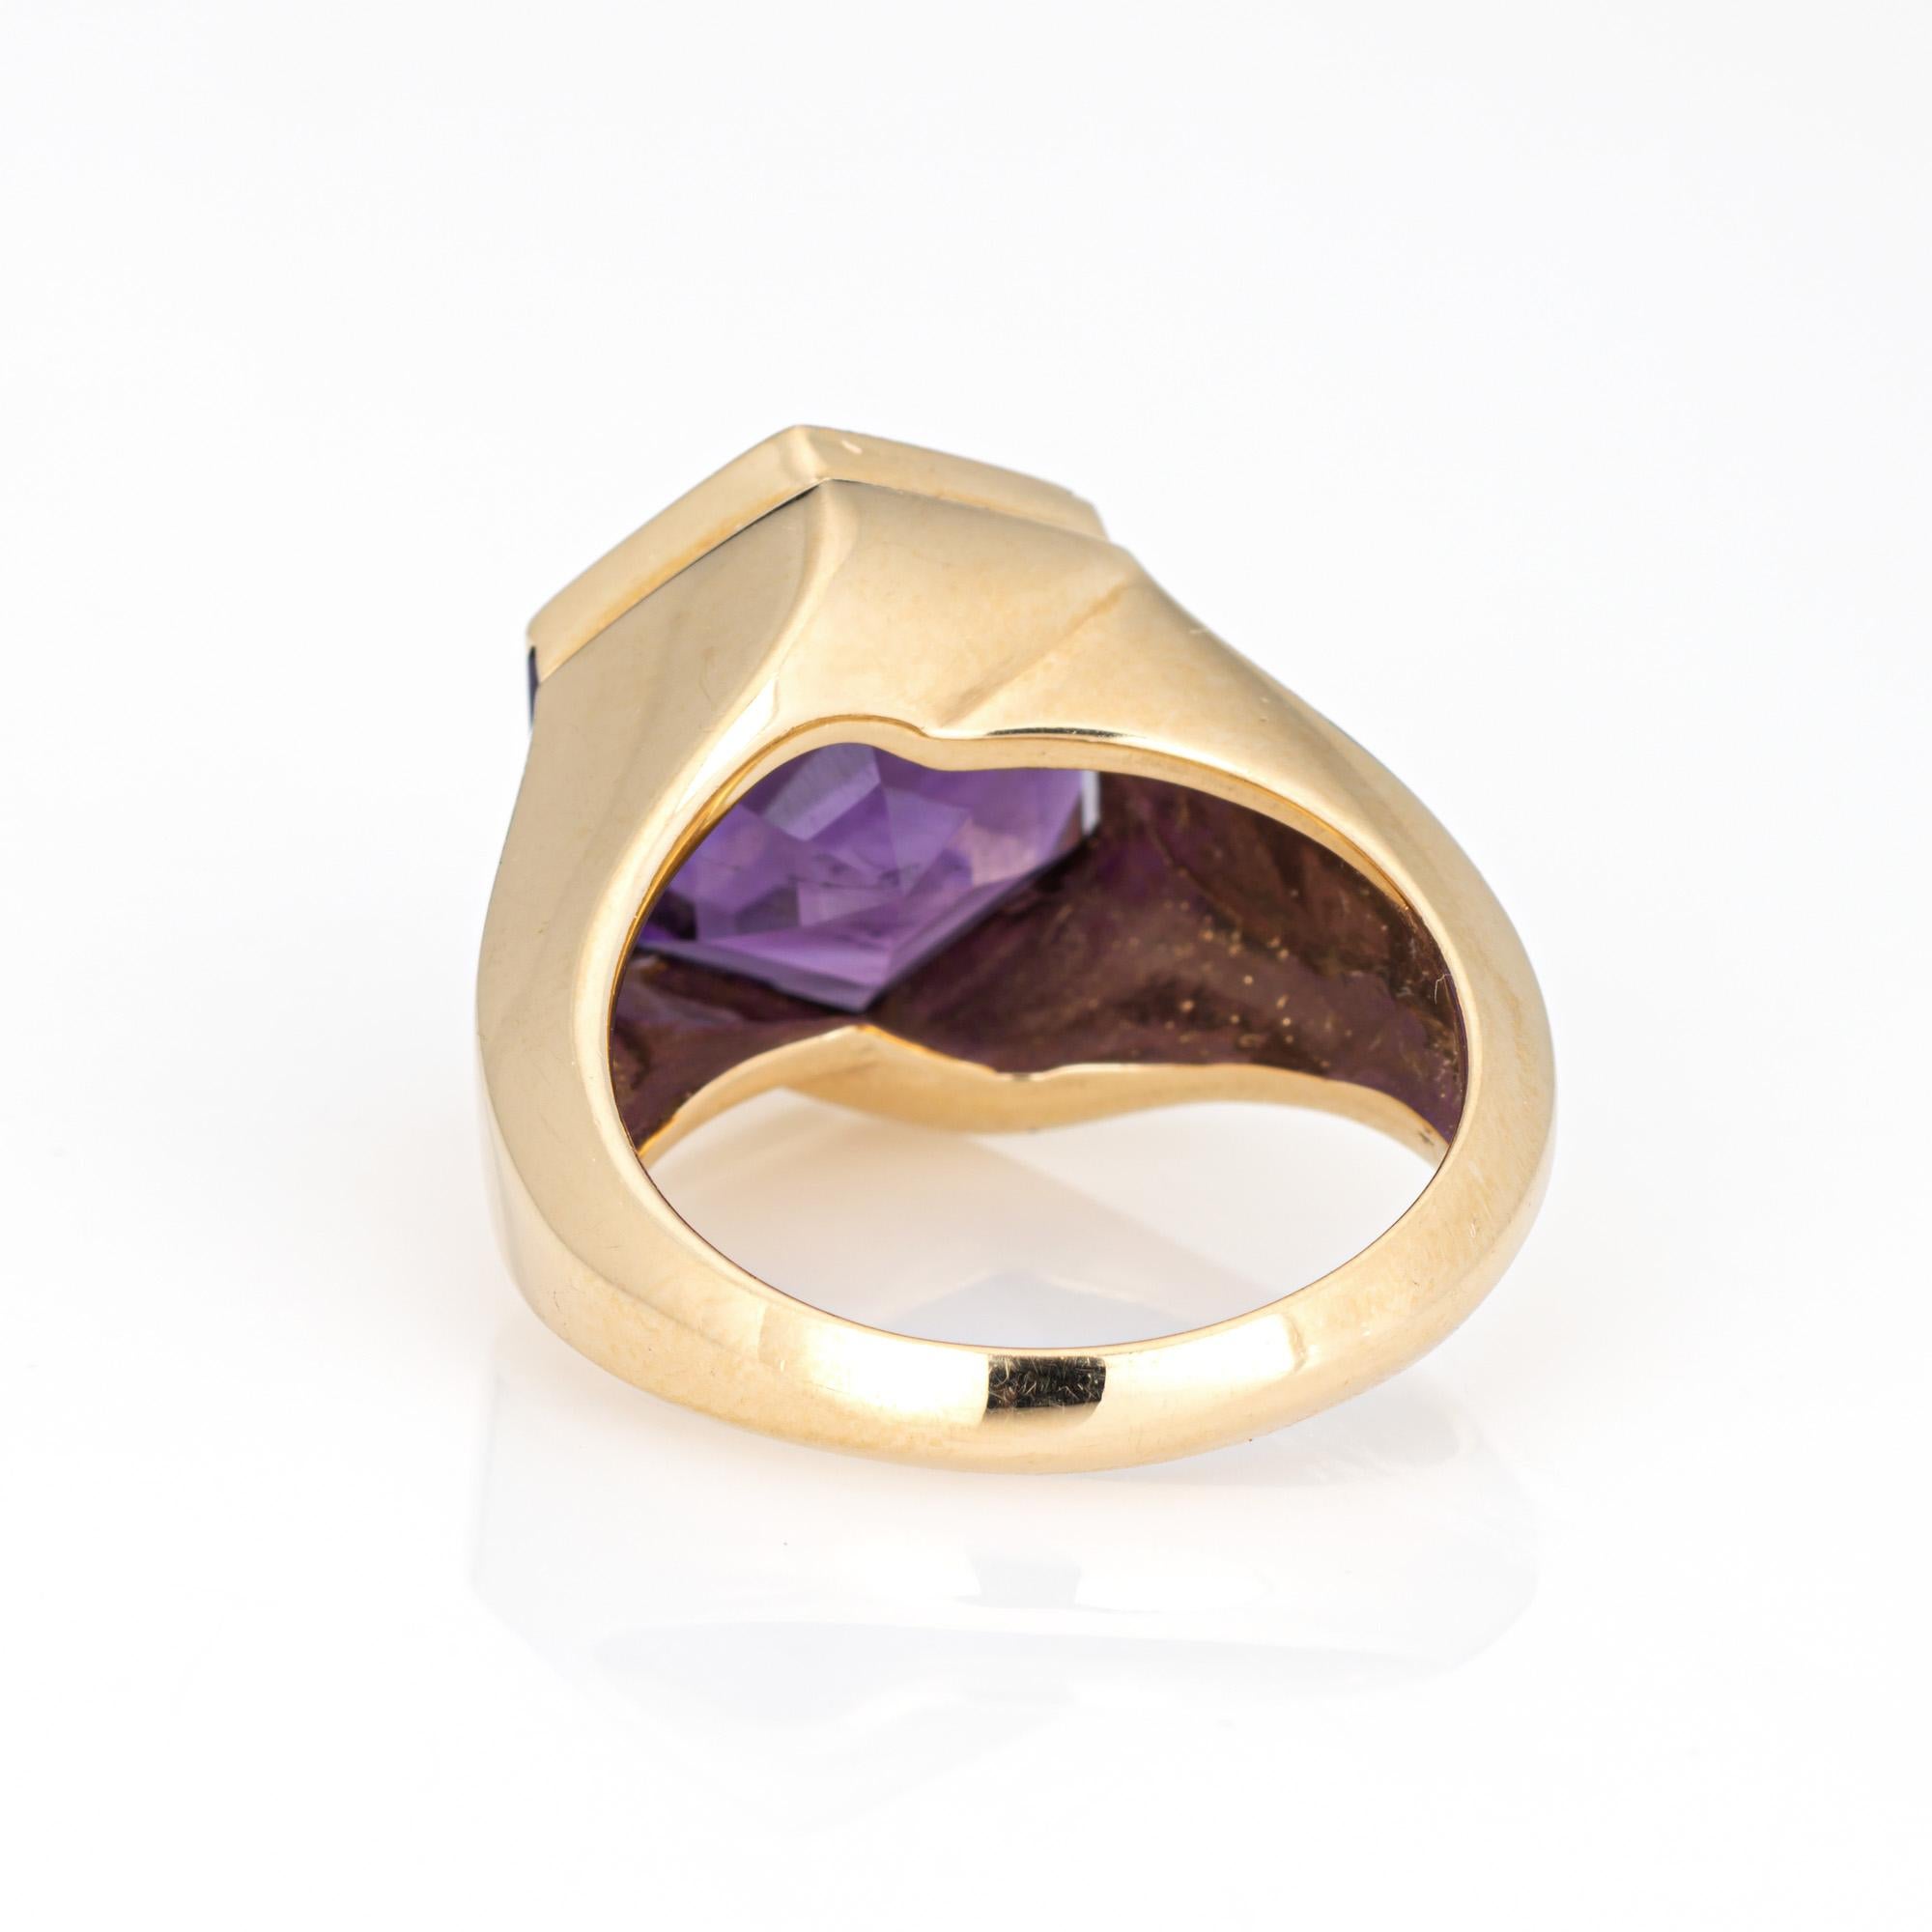 Hexagonal Amethyst Ring Vintage 14k Yellow Gold Sz 7 Estate Fine Jewelry In Good Condition For Sale In Torrance, CA